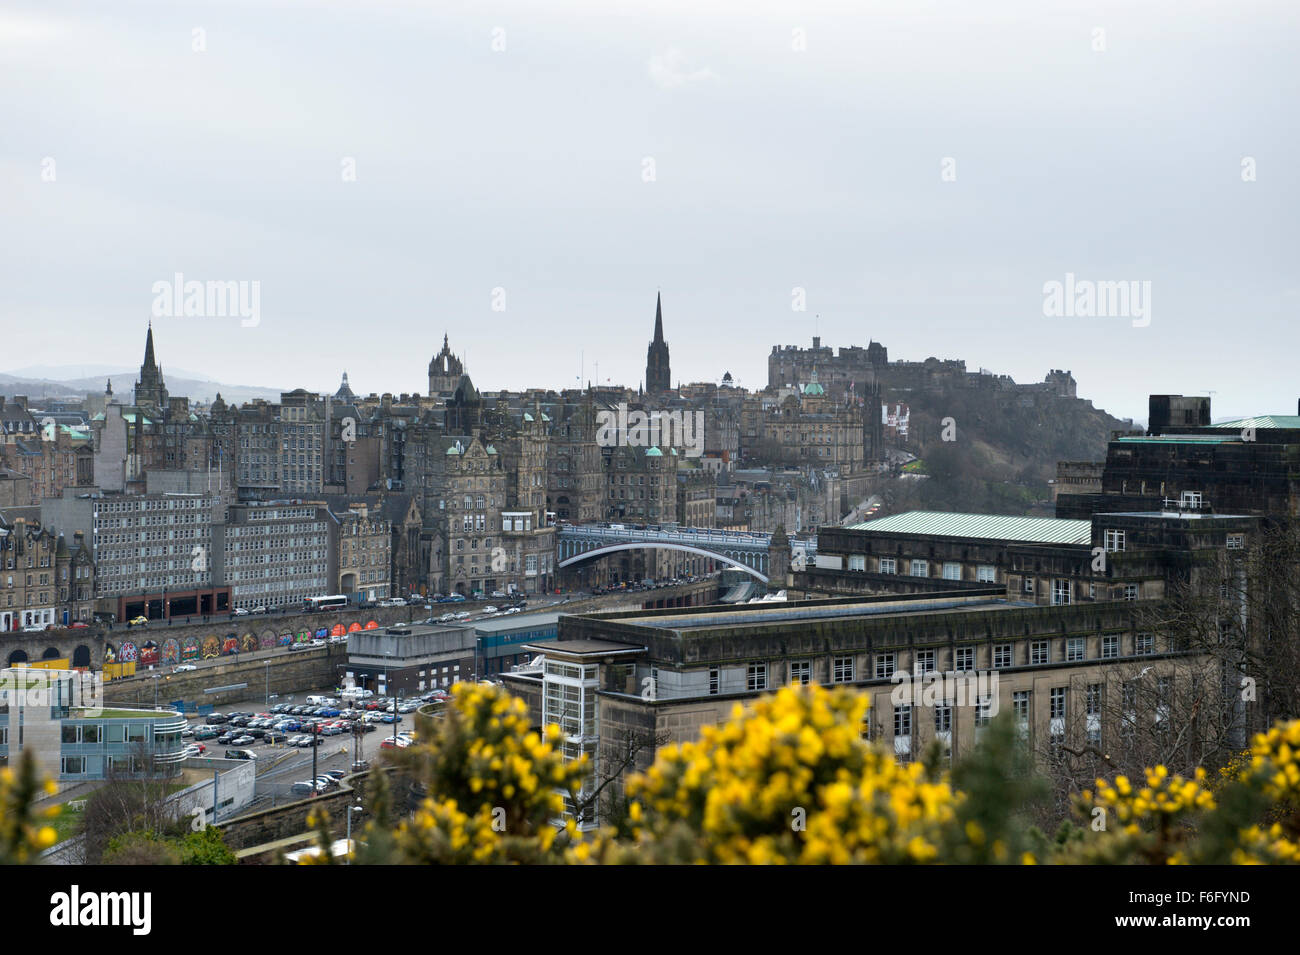 Looking across Waverley Station car park to Edinburgh Castle and Old Town cityscape beyond Stock Photo